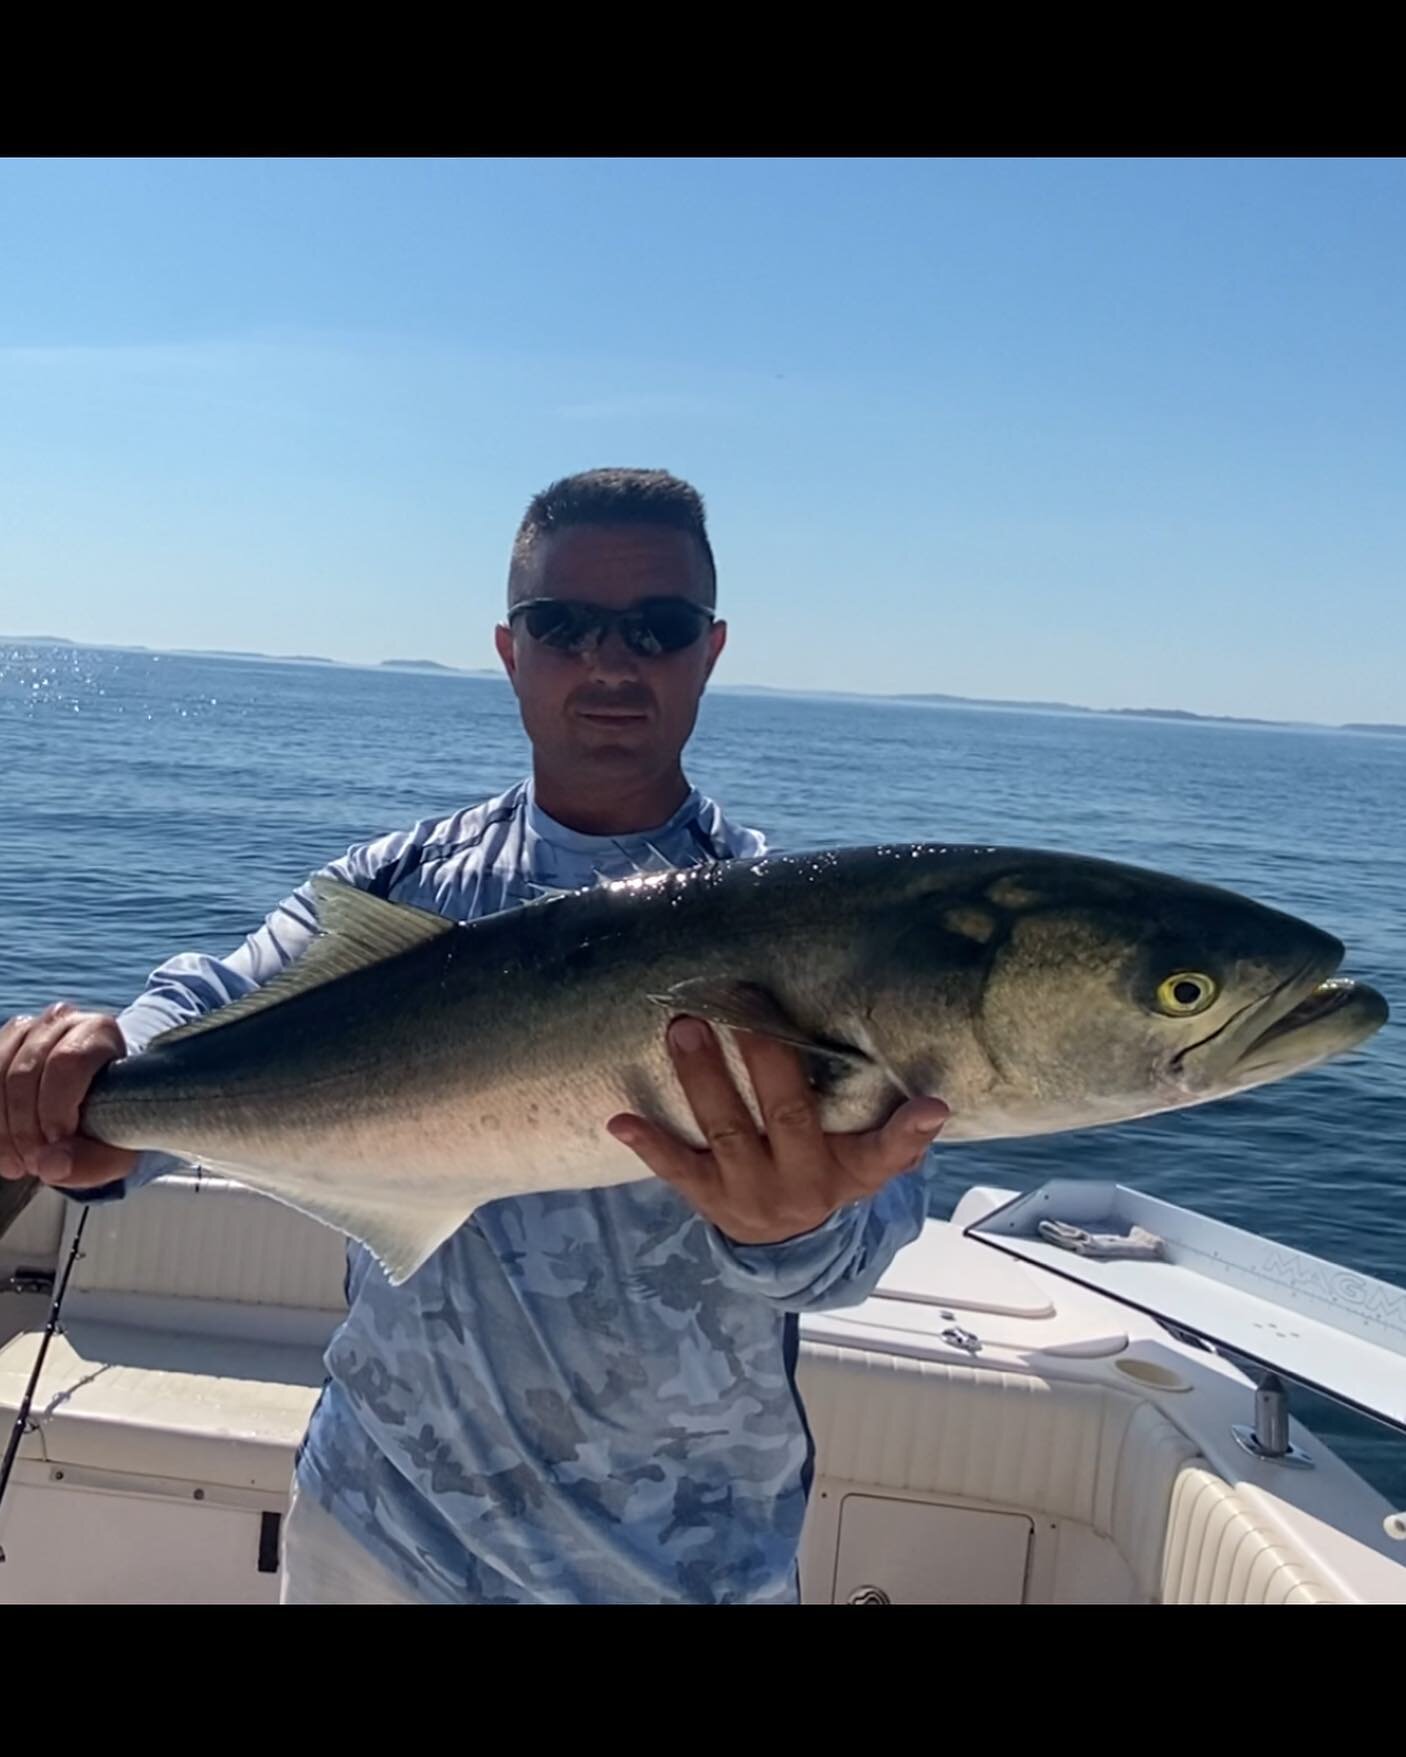 Bluefish bonanza continues this morning. Fishing solo and trying to work two lines by myself (some hook ups no less). This was the only one of many this morning that I actually had a chance to get a quick picture of. 

#bluefish 
#striperfishing 
#li